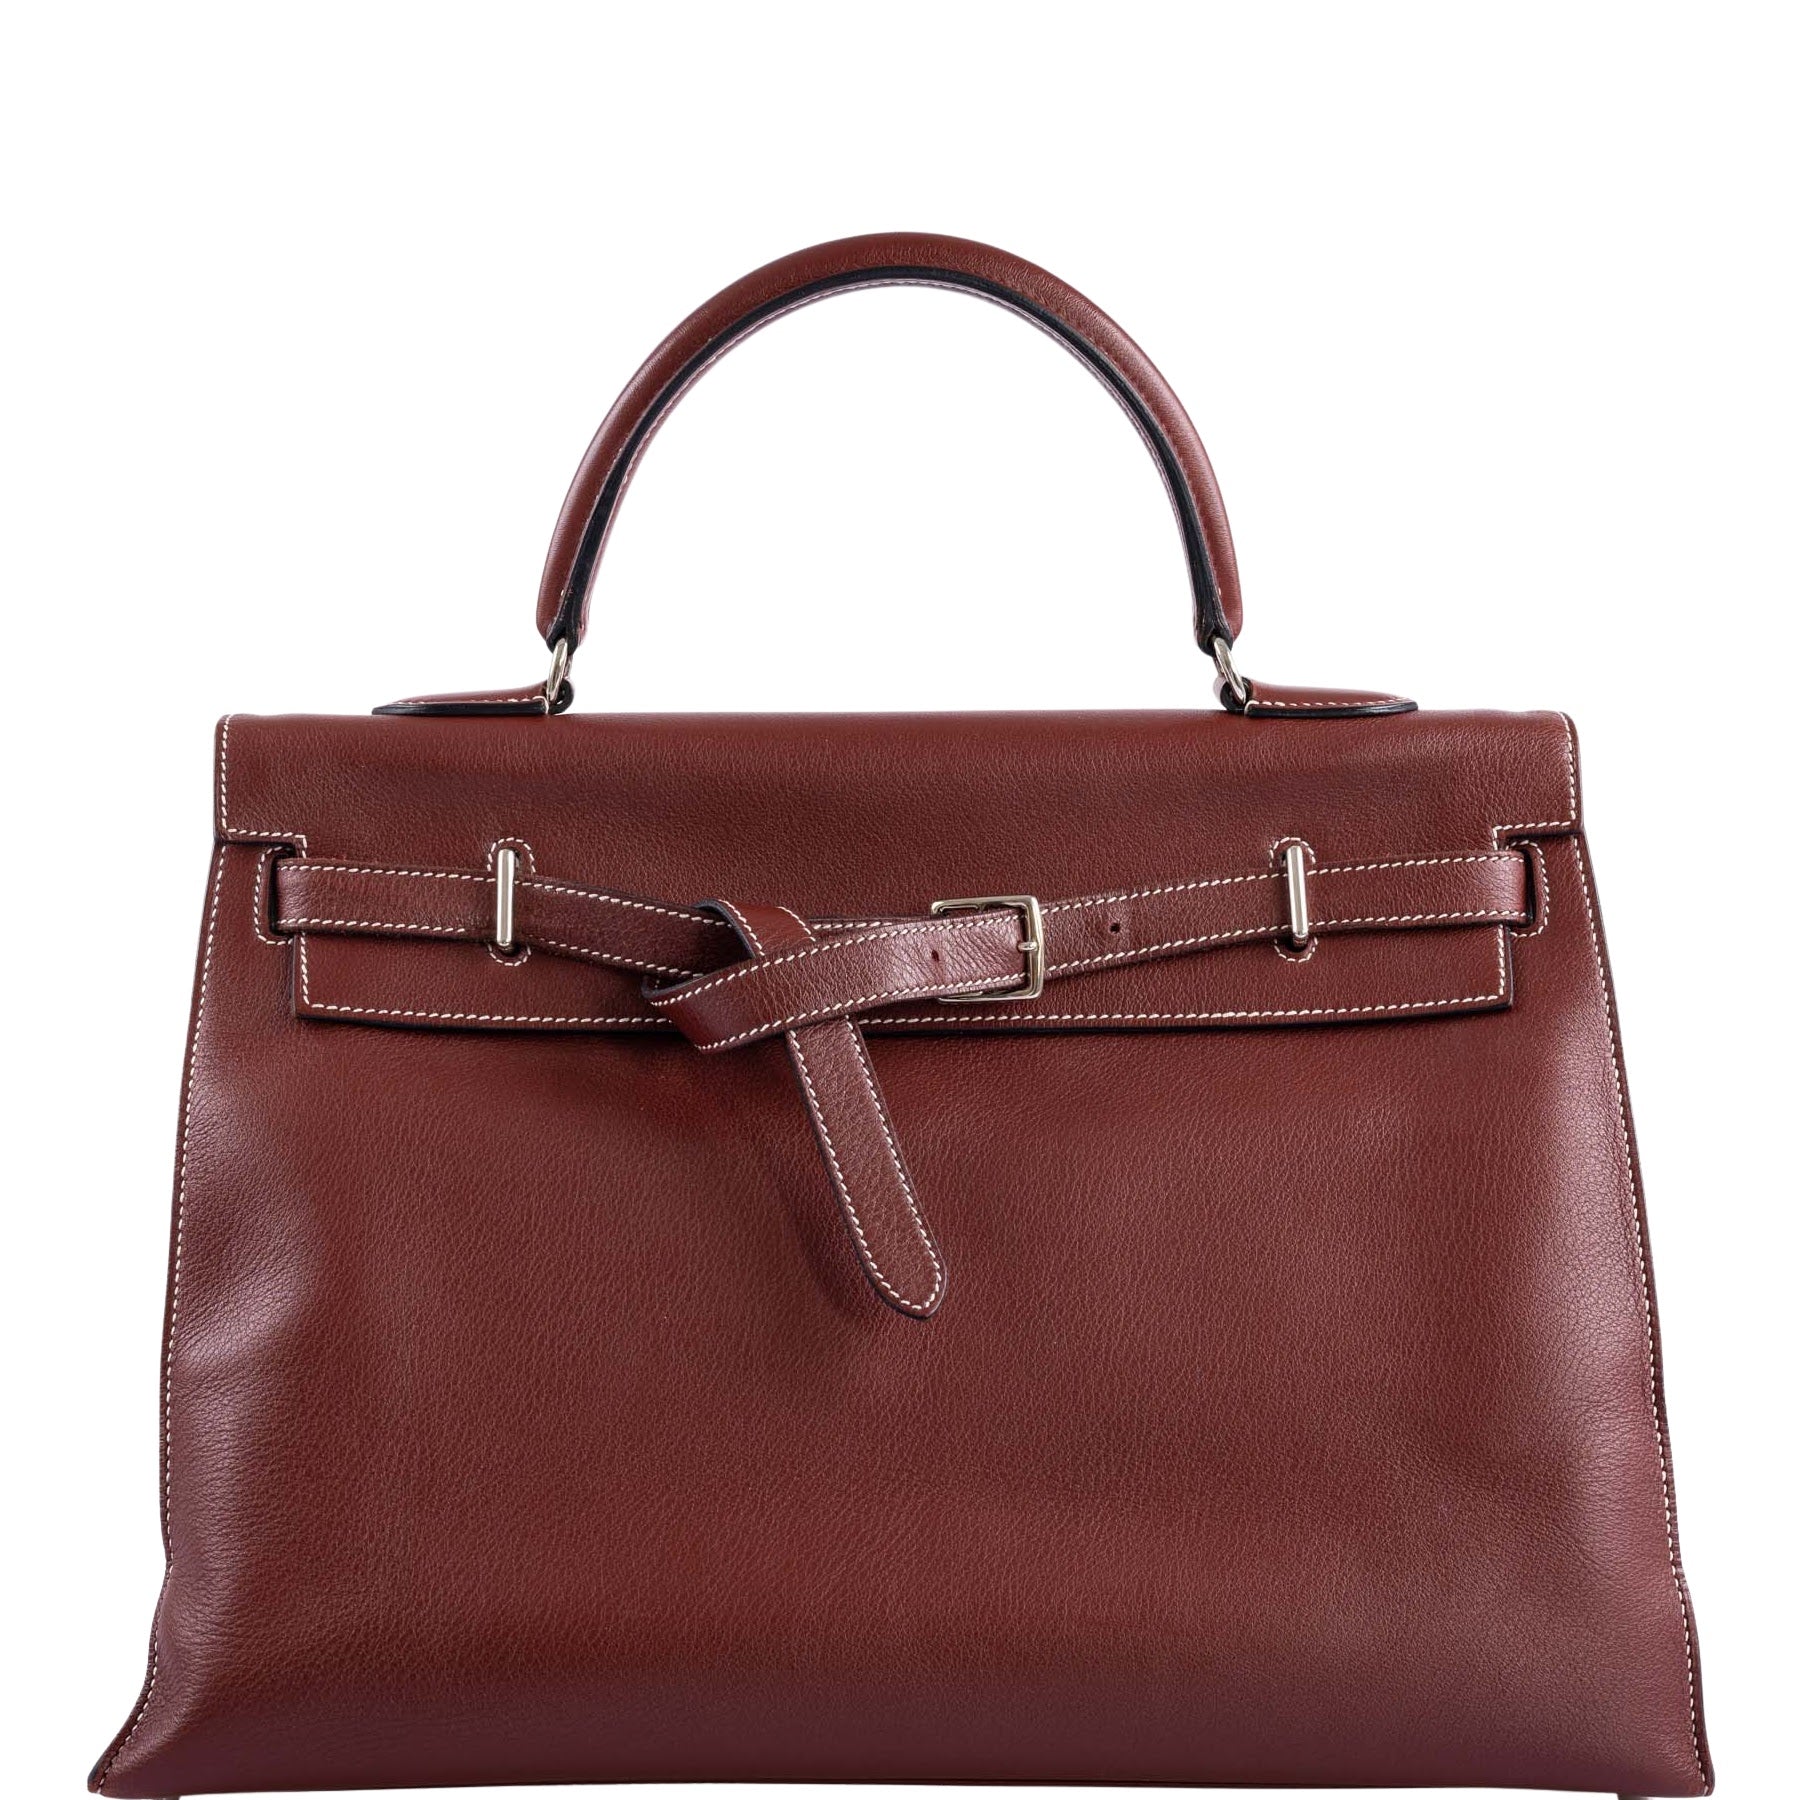 Kelly 35 Hermès on www.rentfashionbag.com at a very incredible price  RENT DON'T BUY!